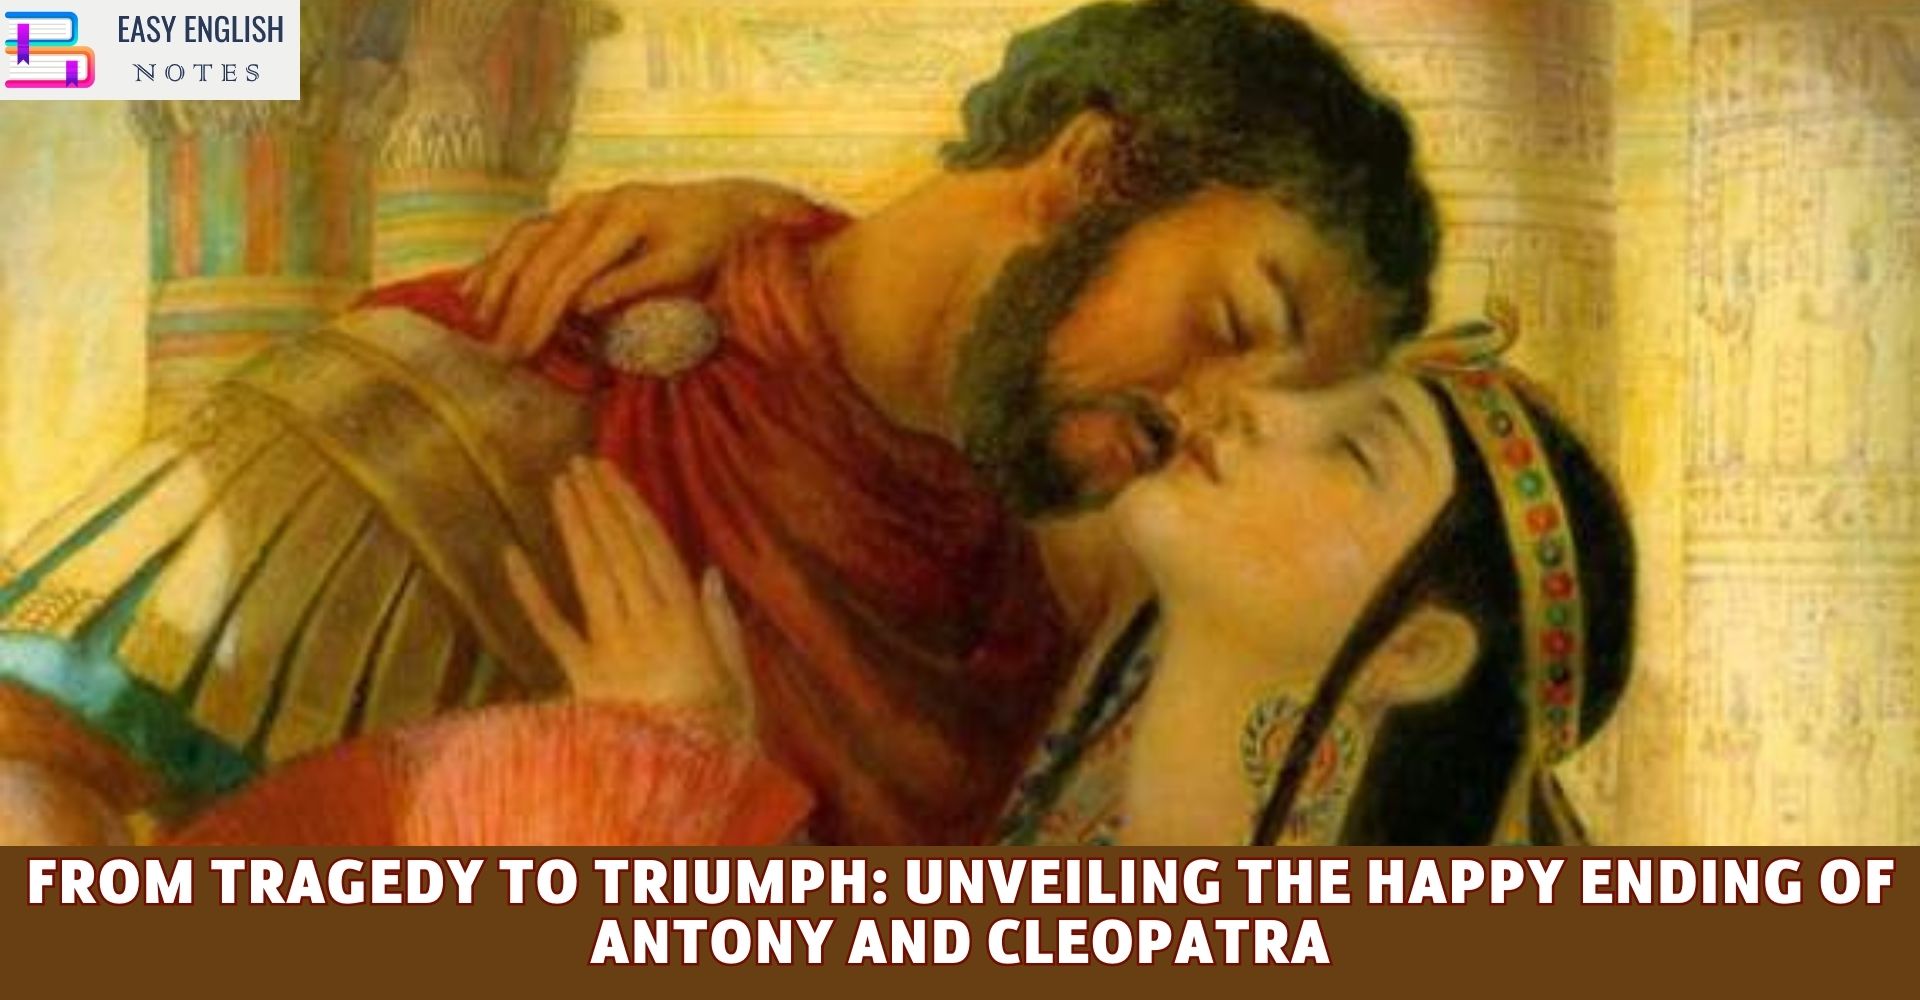 From Tragedy to Triumph: Unveiling the Happy Ending of Antony and Cleopatra